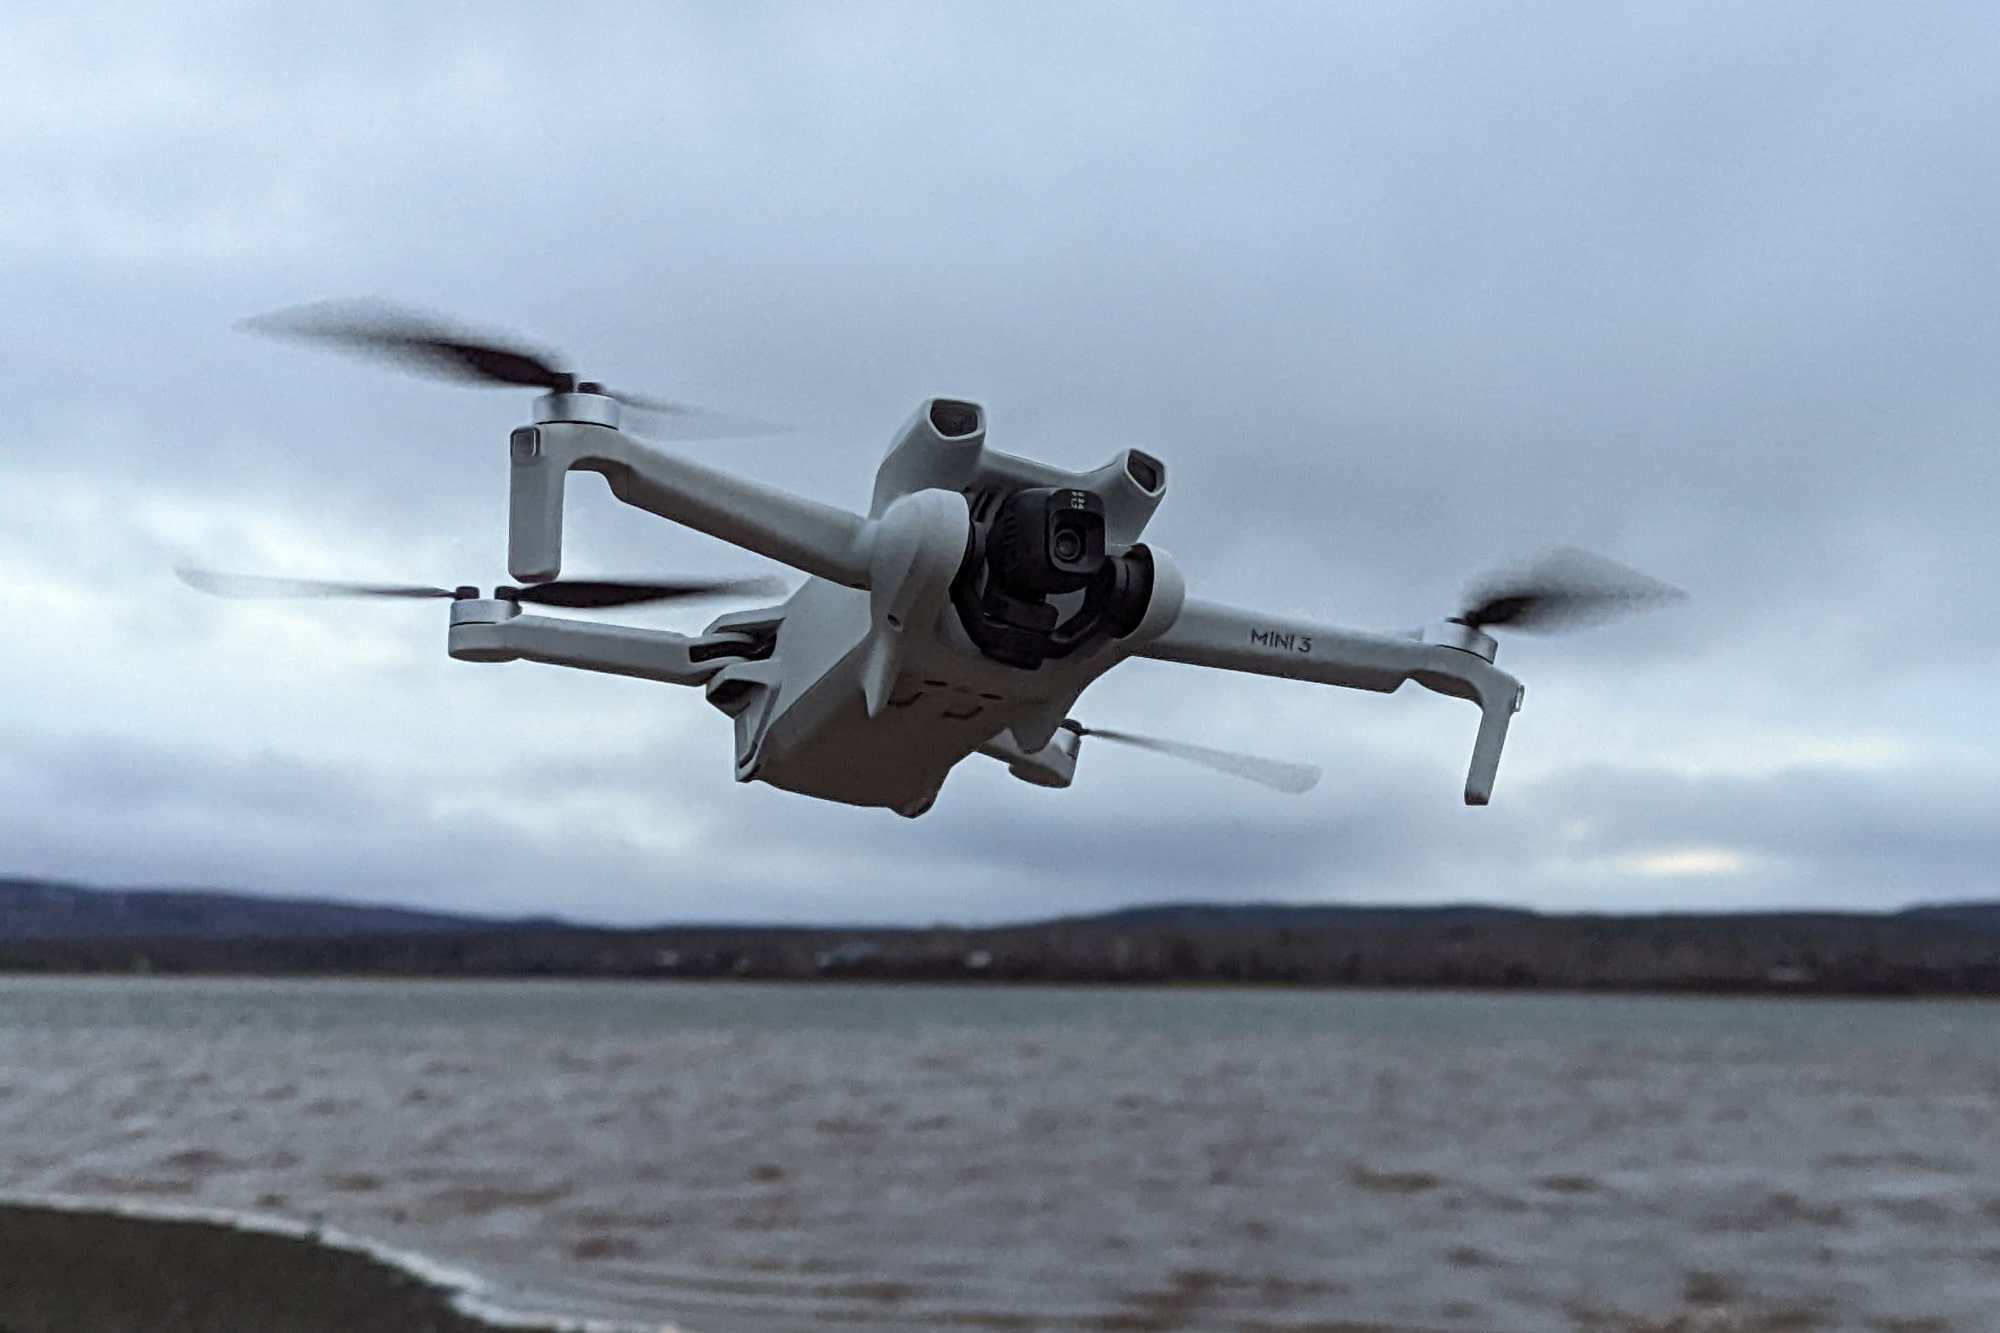 DJI Mini 4 Pro's Release Date Revealed! The Wait Is Over!